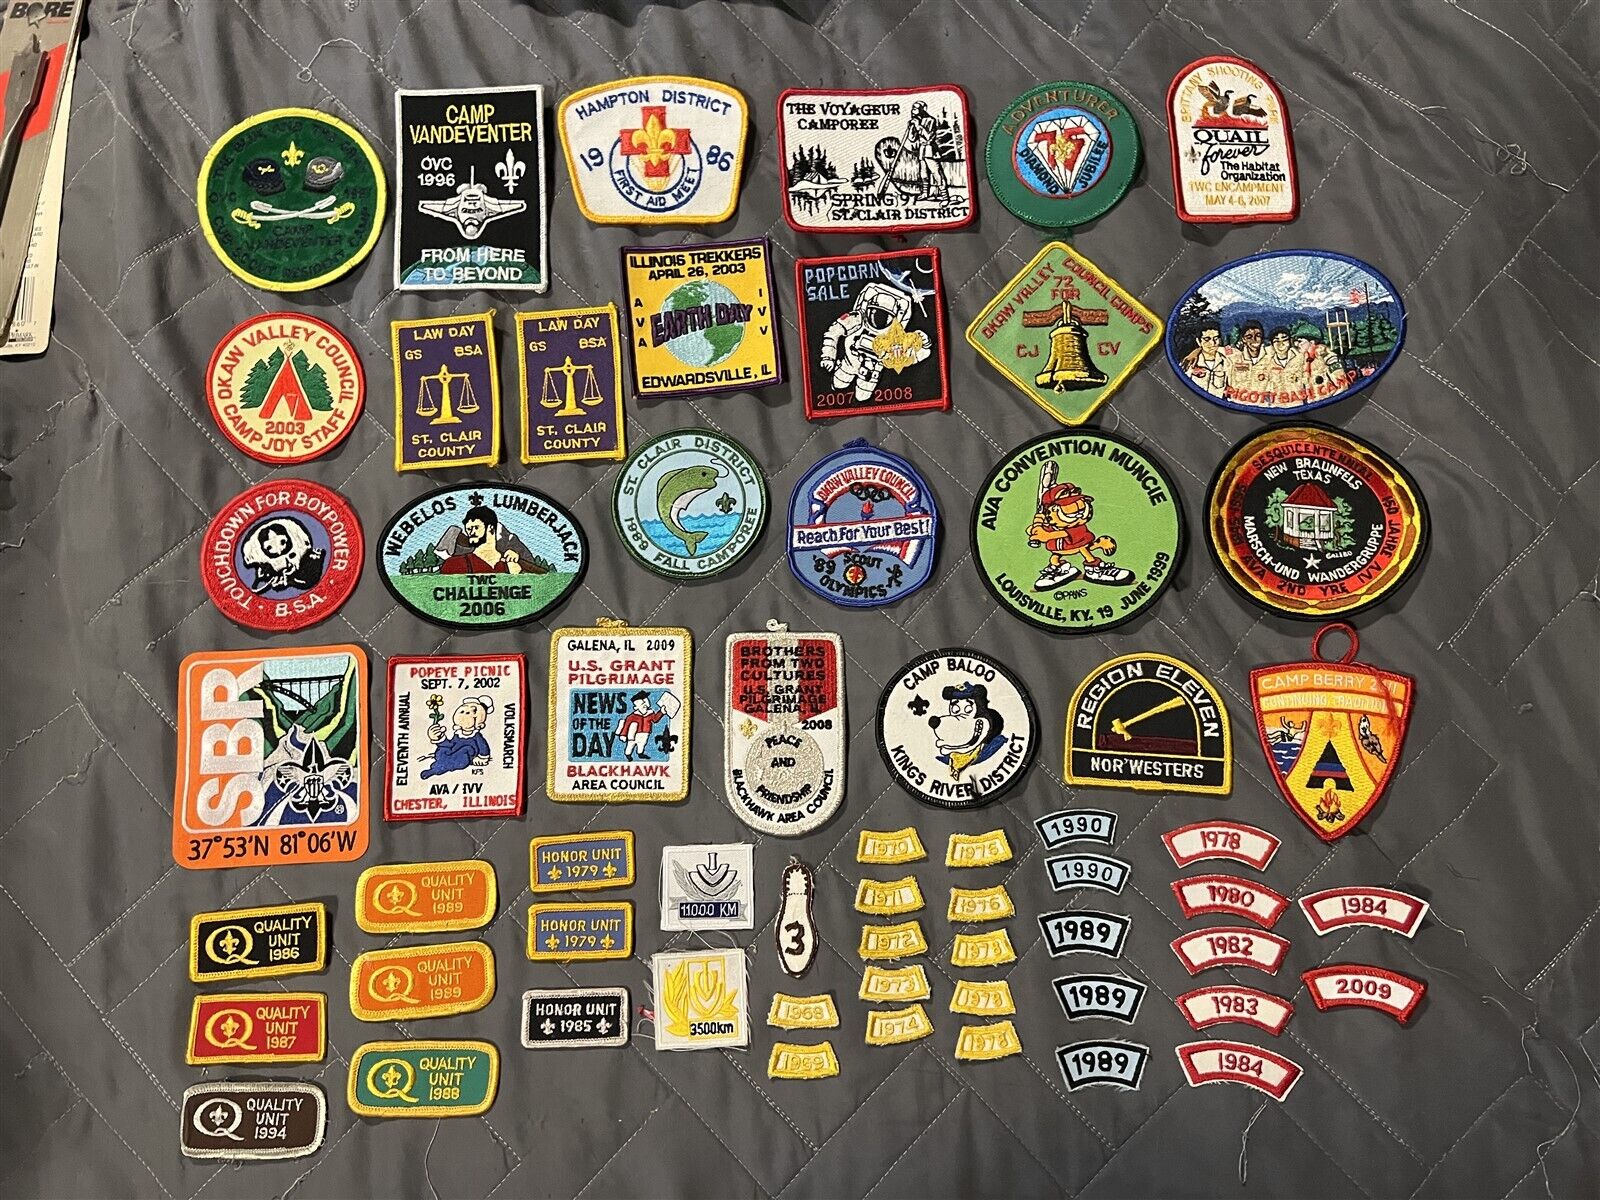 HUGH BOY SCOUT PATCH MERRIT BADGE LOT OF 61 GREAT COLLECTION SCOUTS BADGES